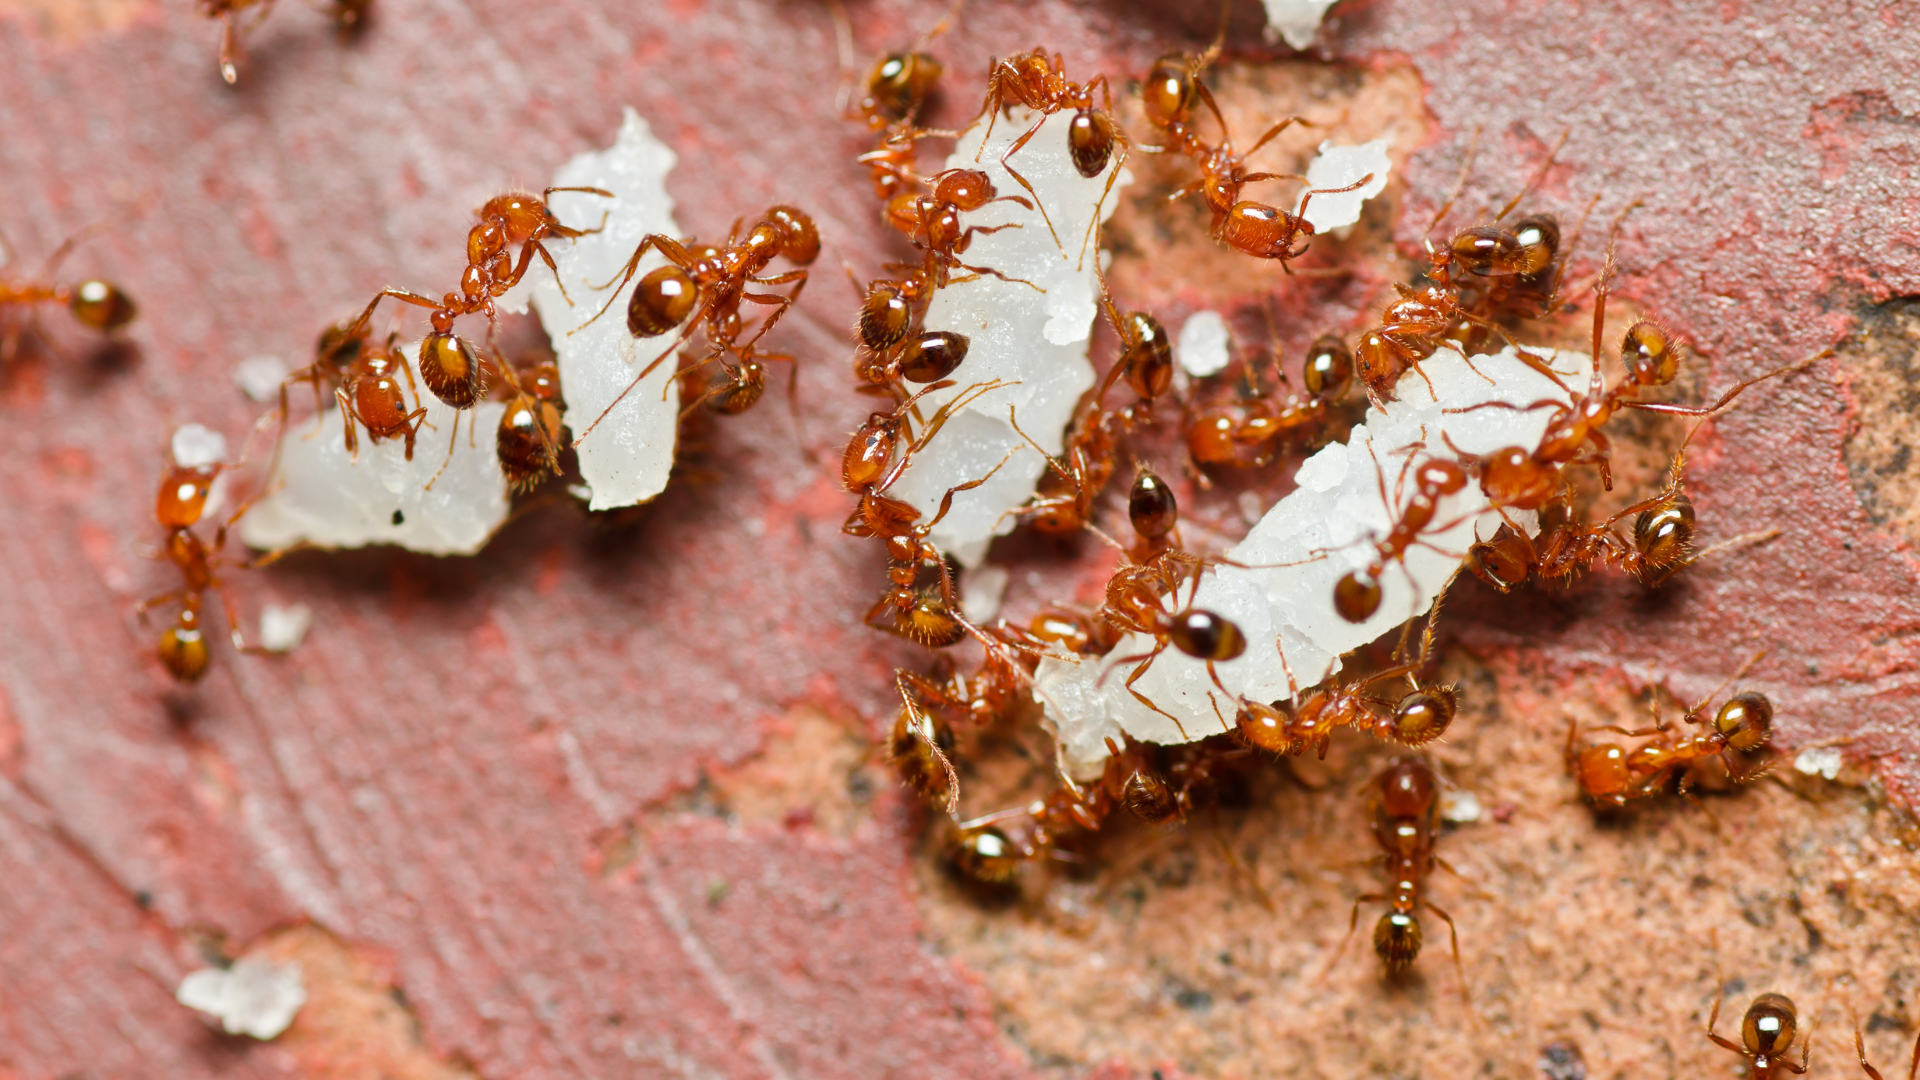 Fire ants are some of the most aggressive ants